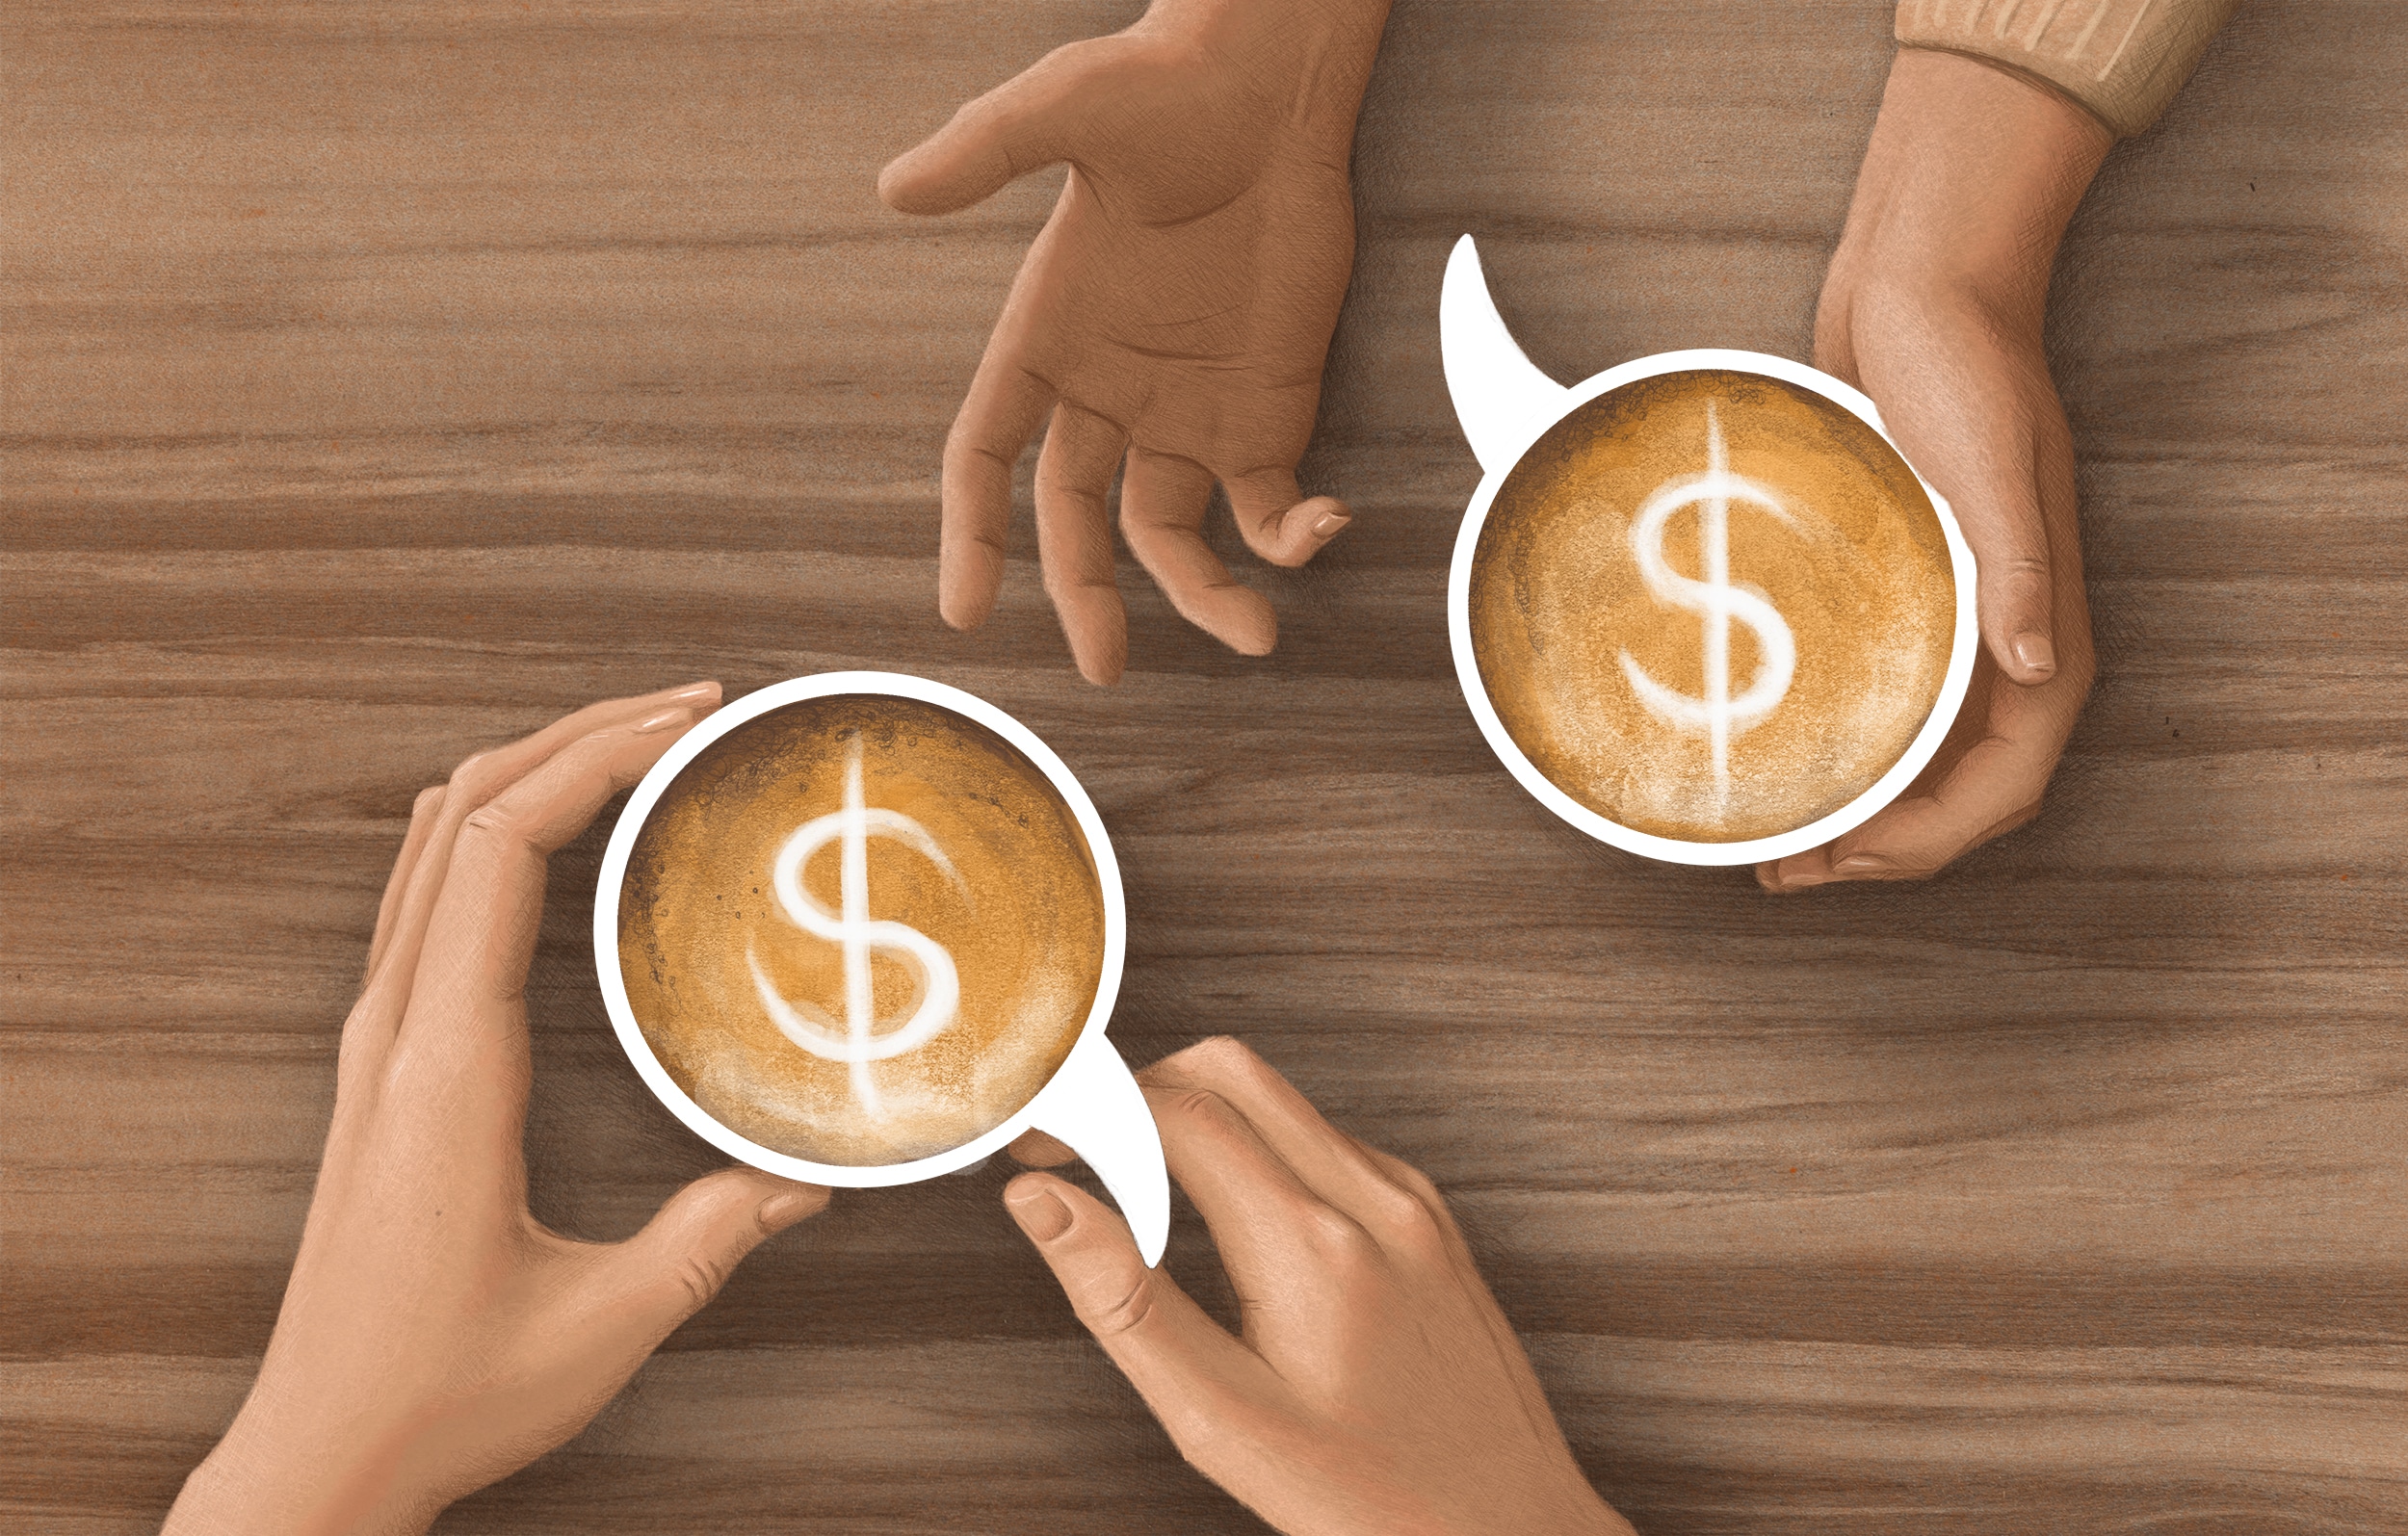 Top-Down view of two pairs of hands holding coffee cups and gesturing as if in conversation. The rims of the coffee cups are shaped like speech bubbles, and the latte art depicts dollar signs.